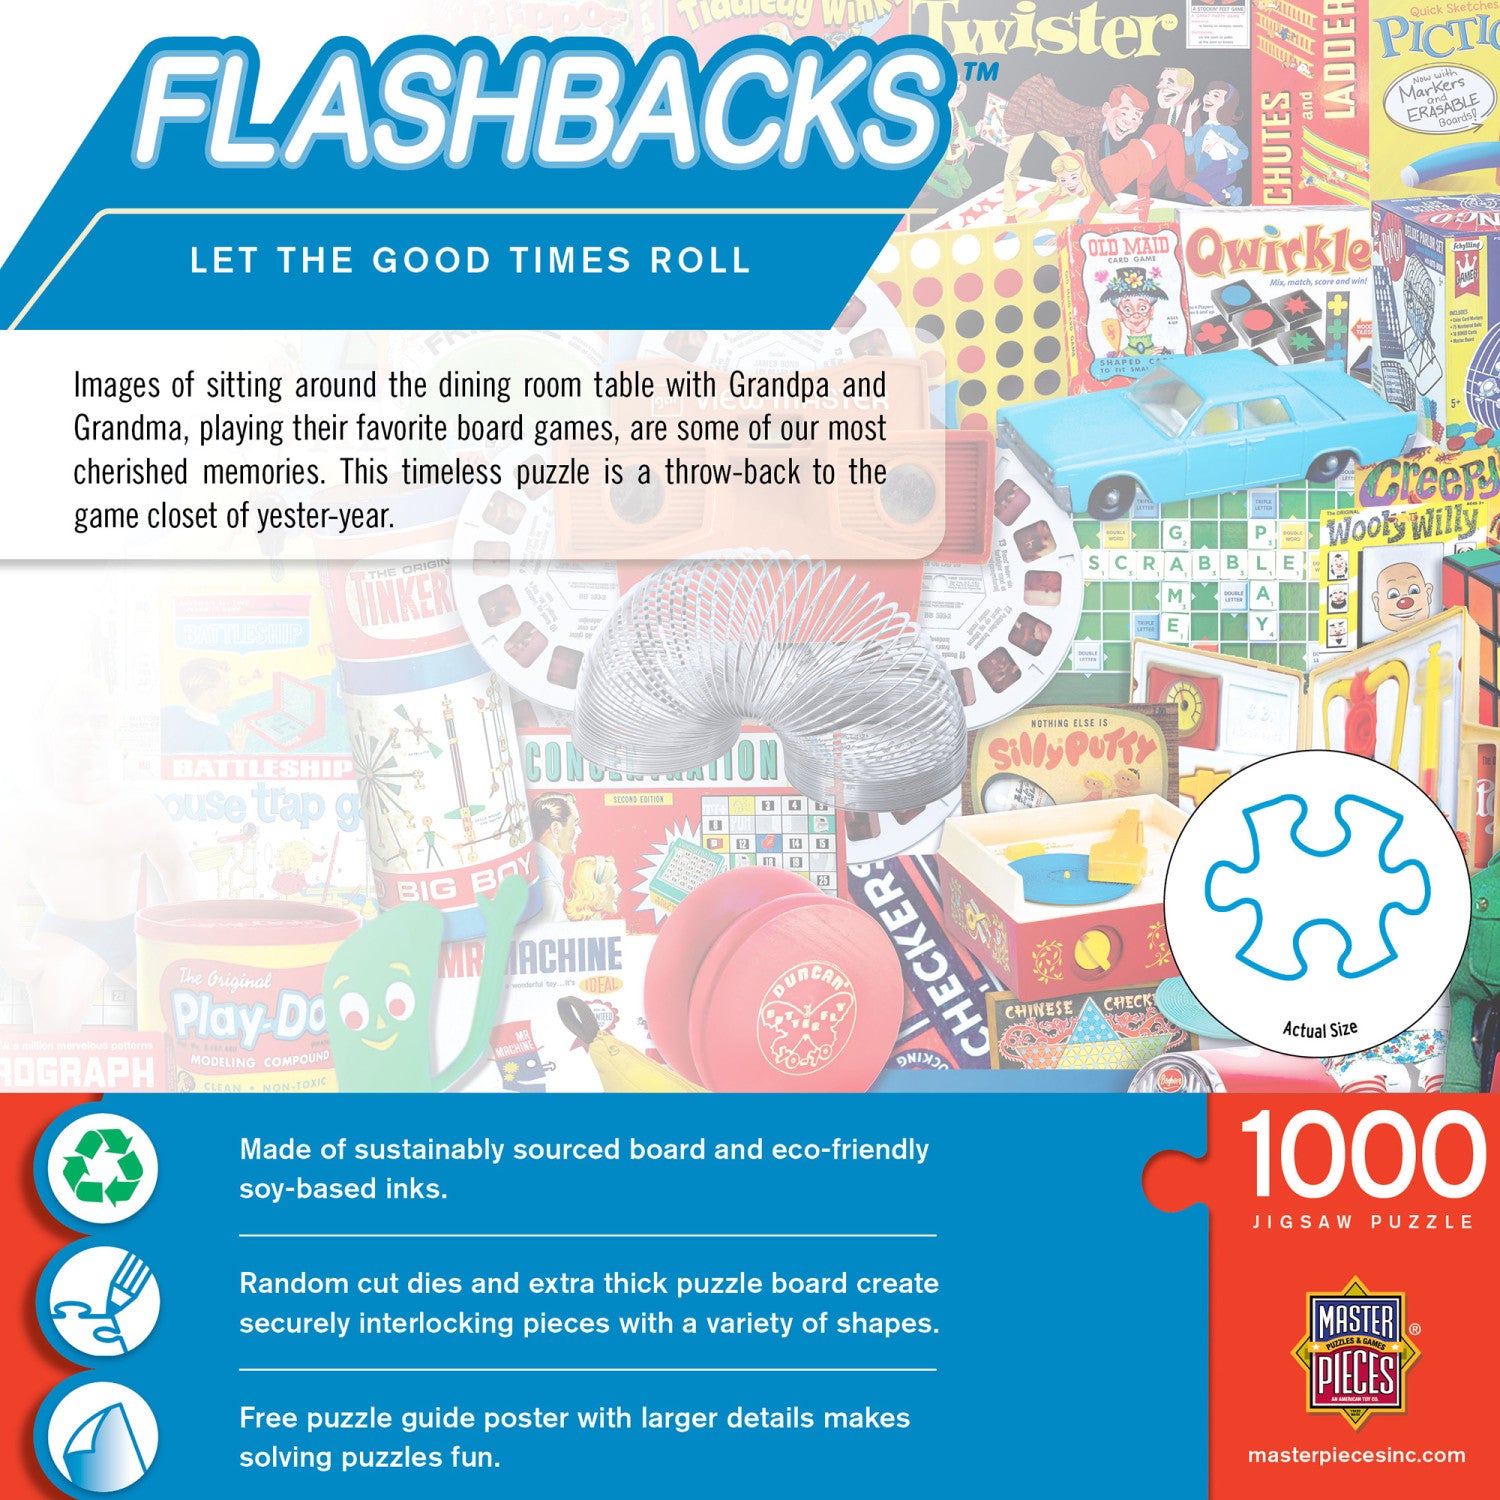 Flashbacks - Let the Good Times Roll 1000 Piece Jigsaw Puzzle